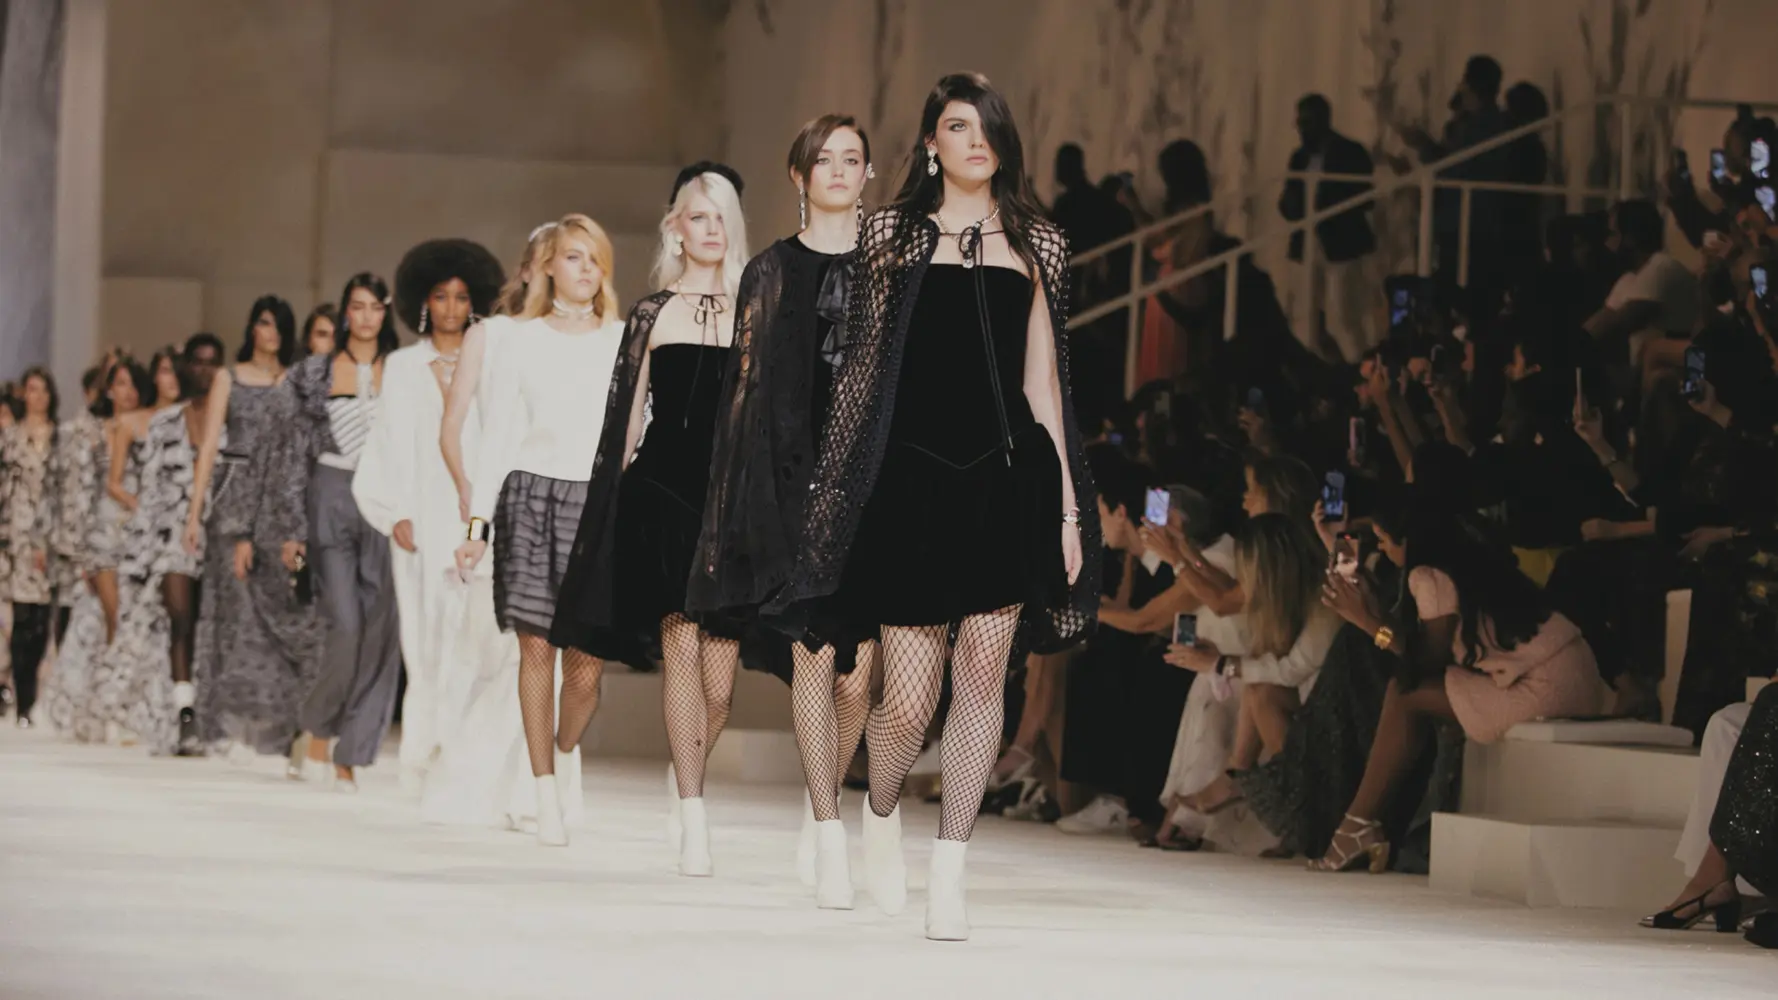 We prefer a dream over controversy Chanel at Paris fashion week  Chanel   The Guardian